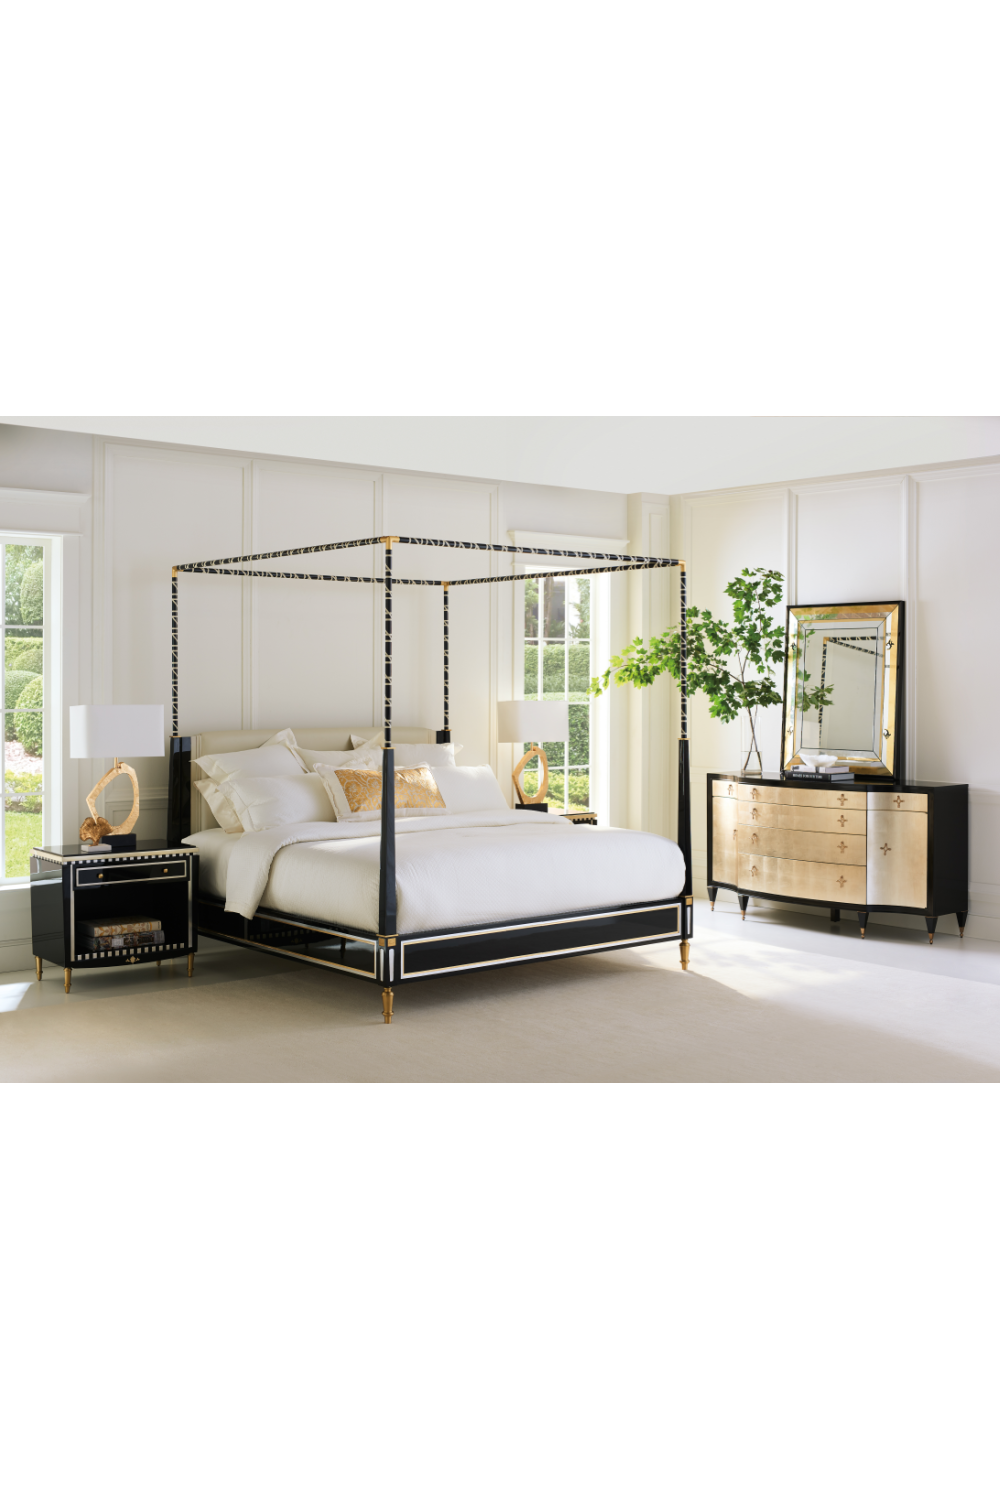 Black Leather Canopy Bed | Caracole The Couturier | Oroa.com